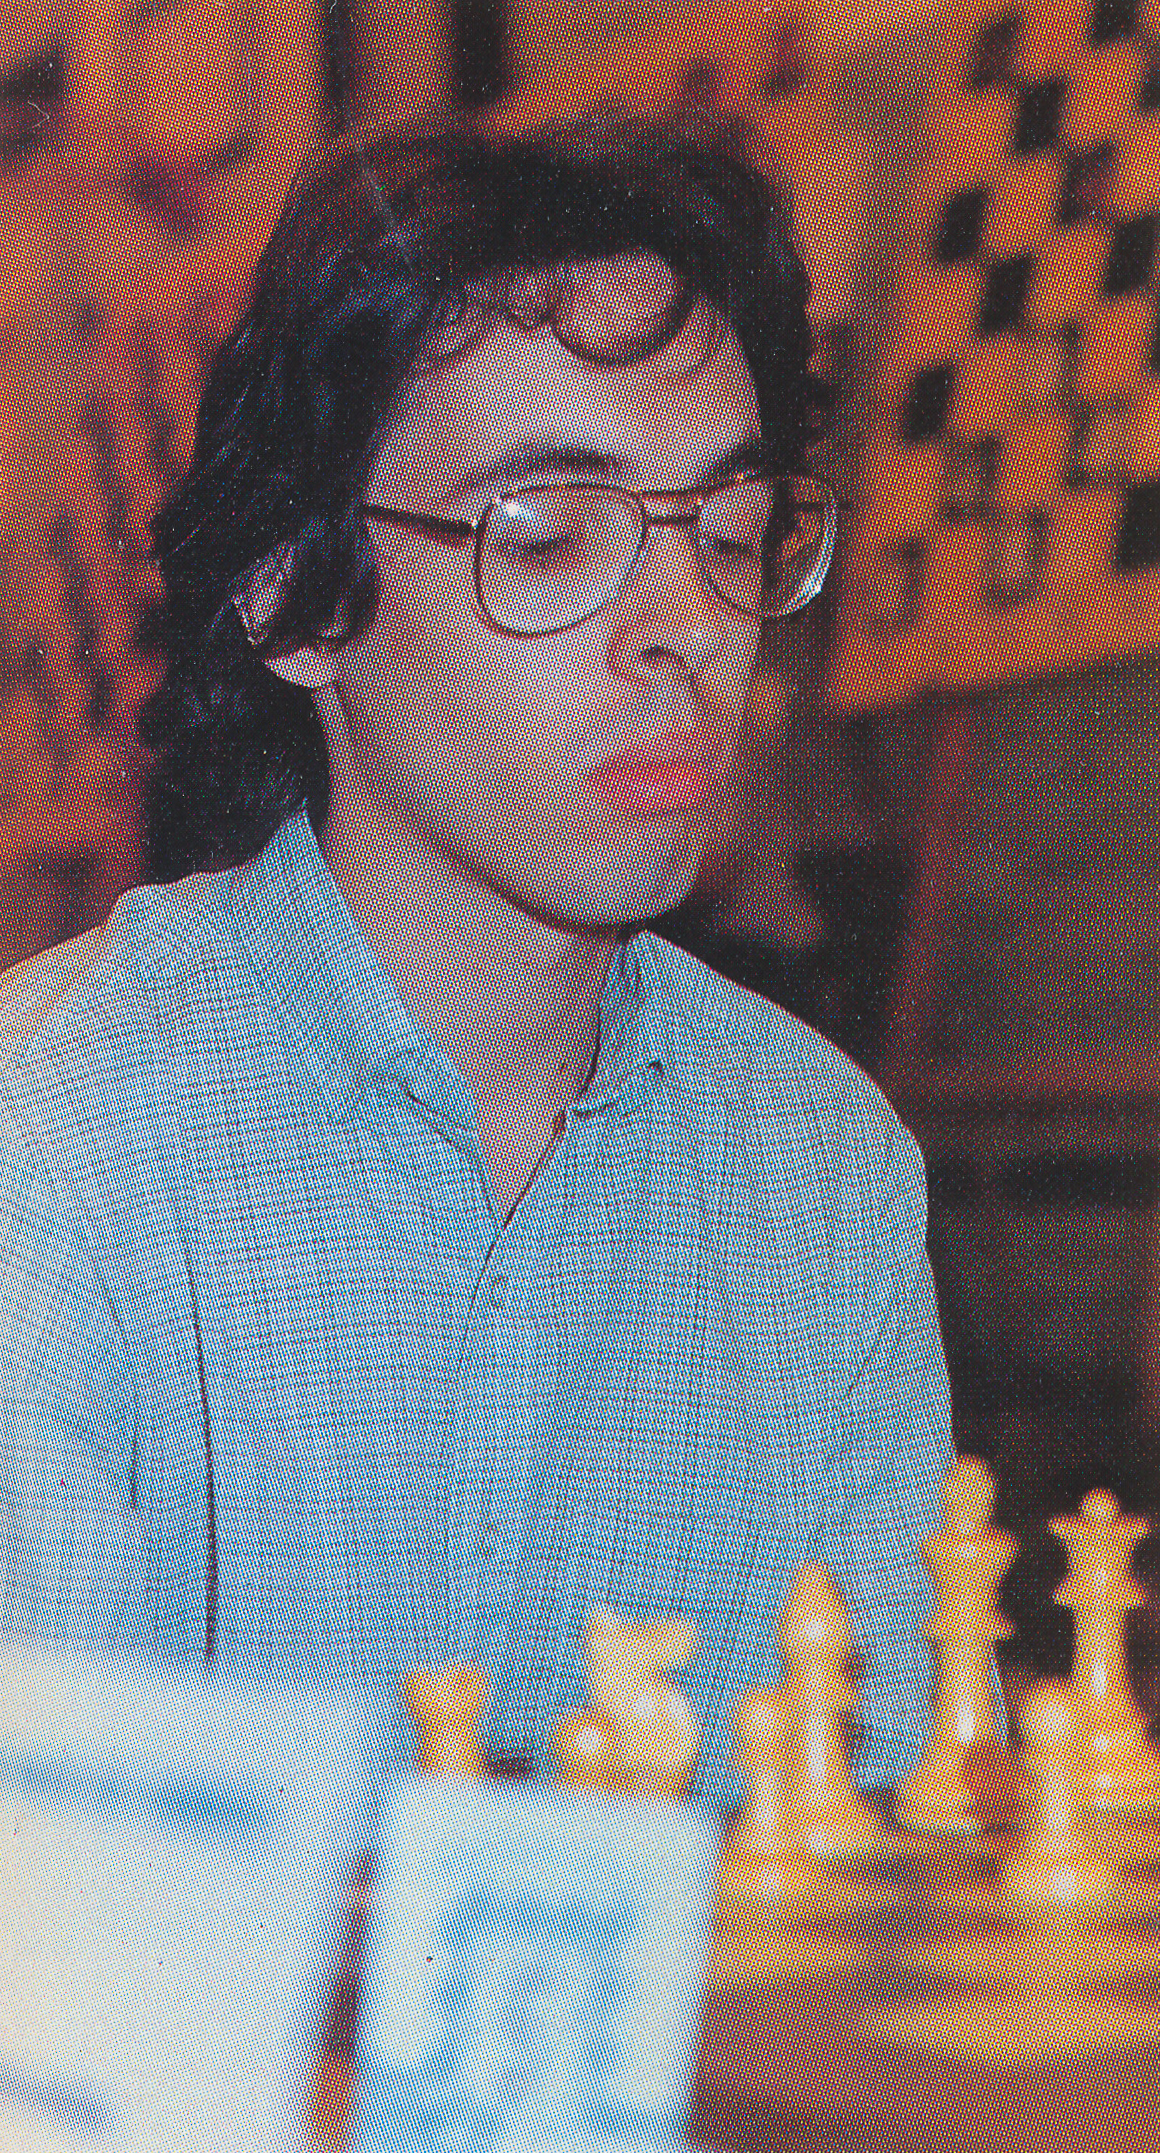 IM Shaun Taulbut, Source : Guinness Chess The Records (1986)